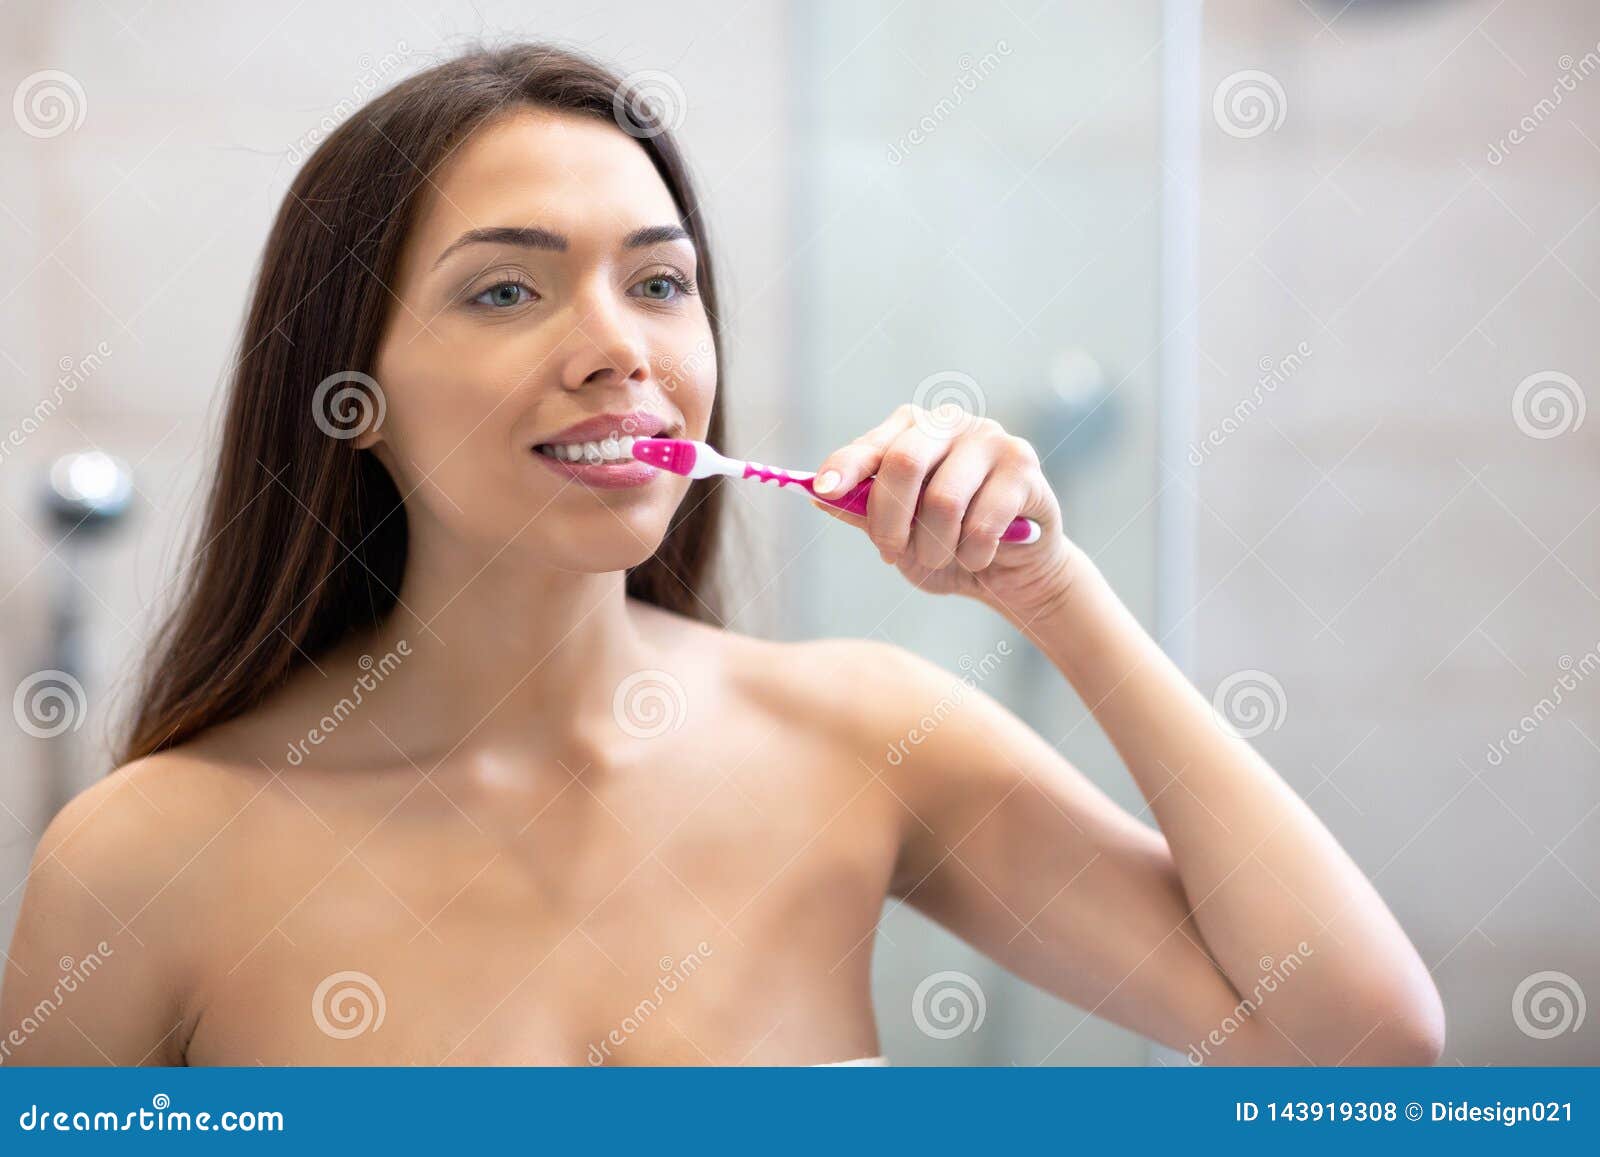 Attractive Woman Brushing Her Teeth Stock Photo Image Of Girl Person